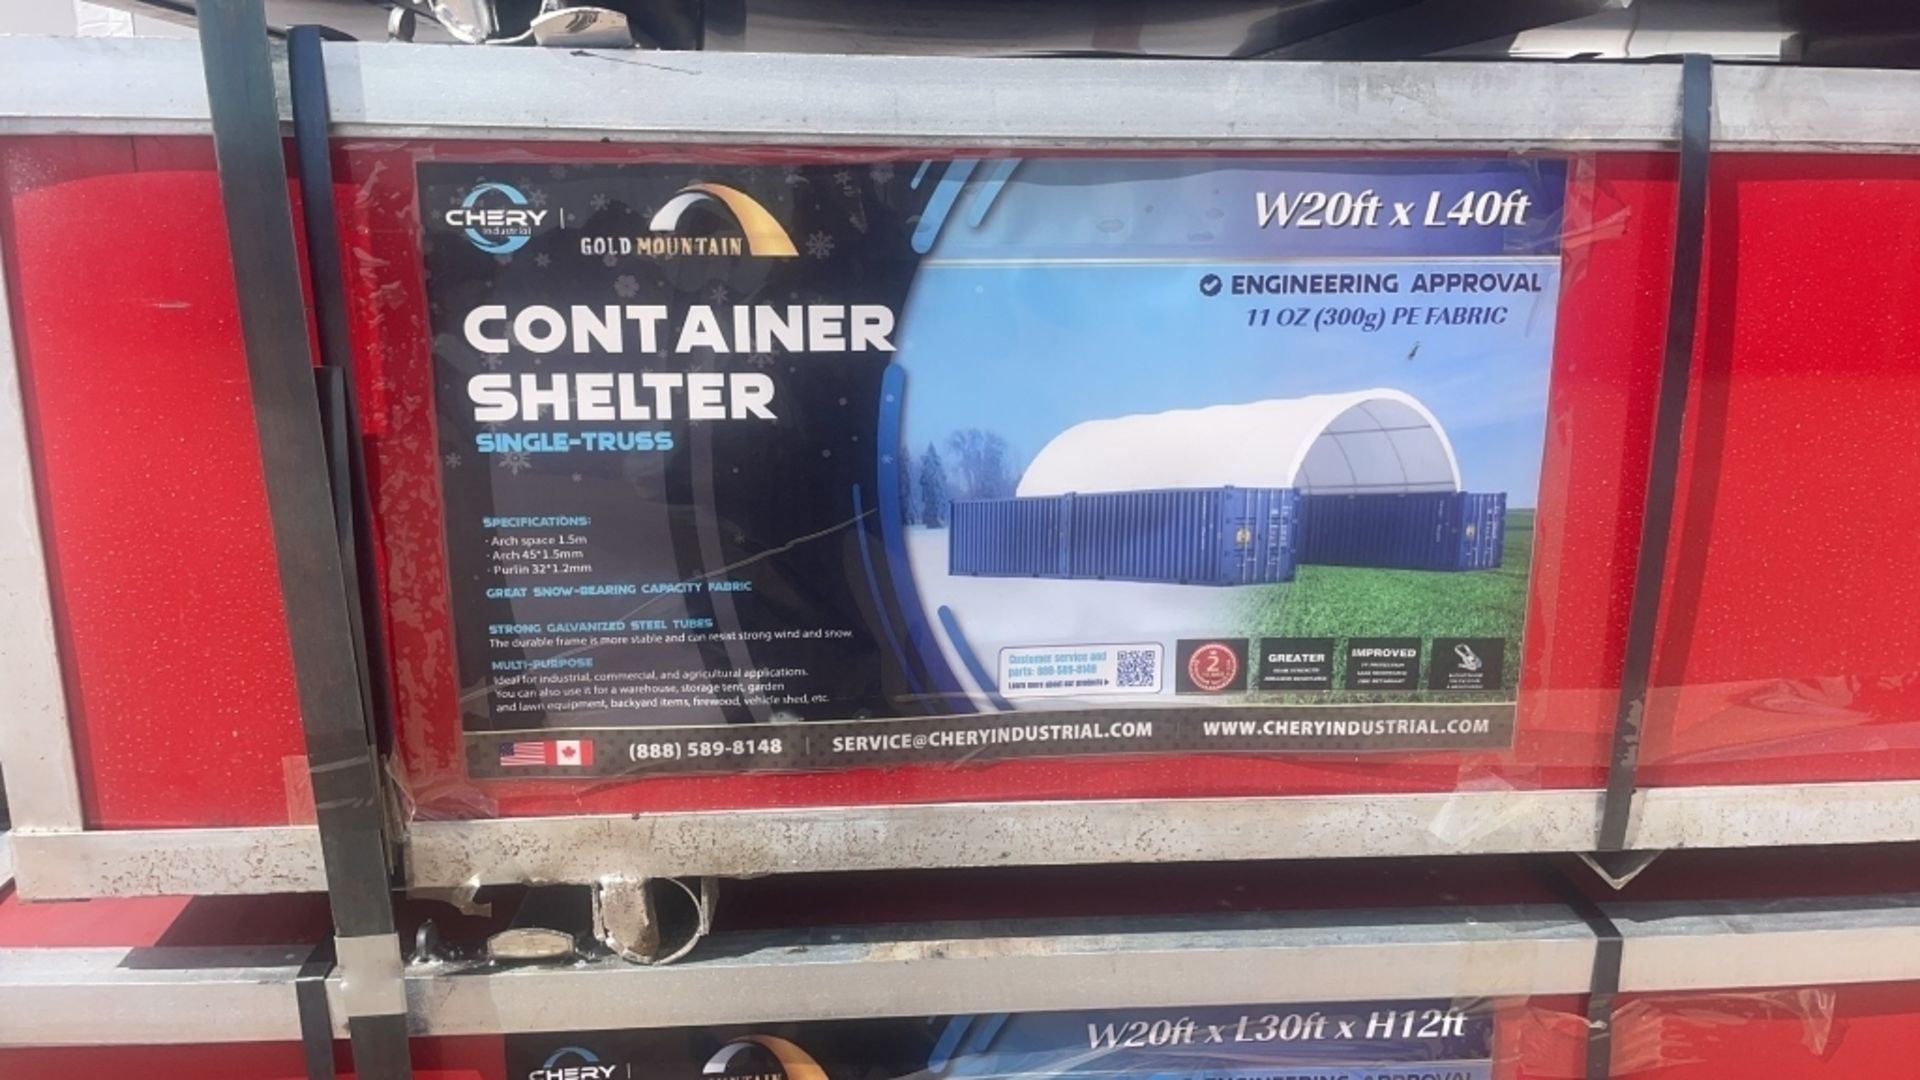 Unused 20x40 Dome Container Shelter in broken box - Image 3 of 6